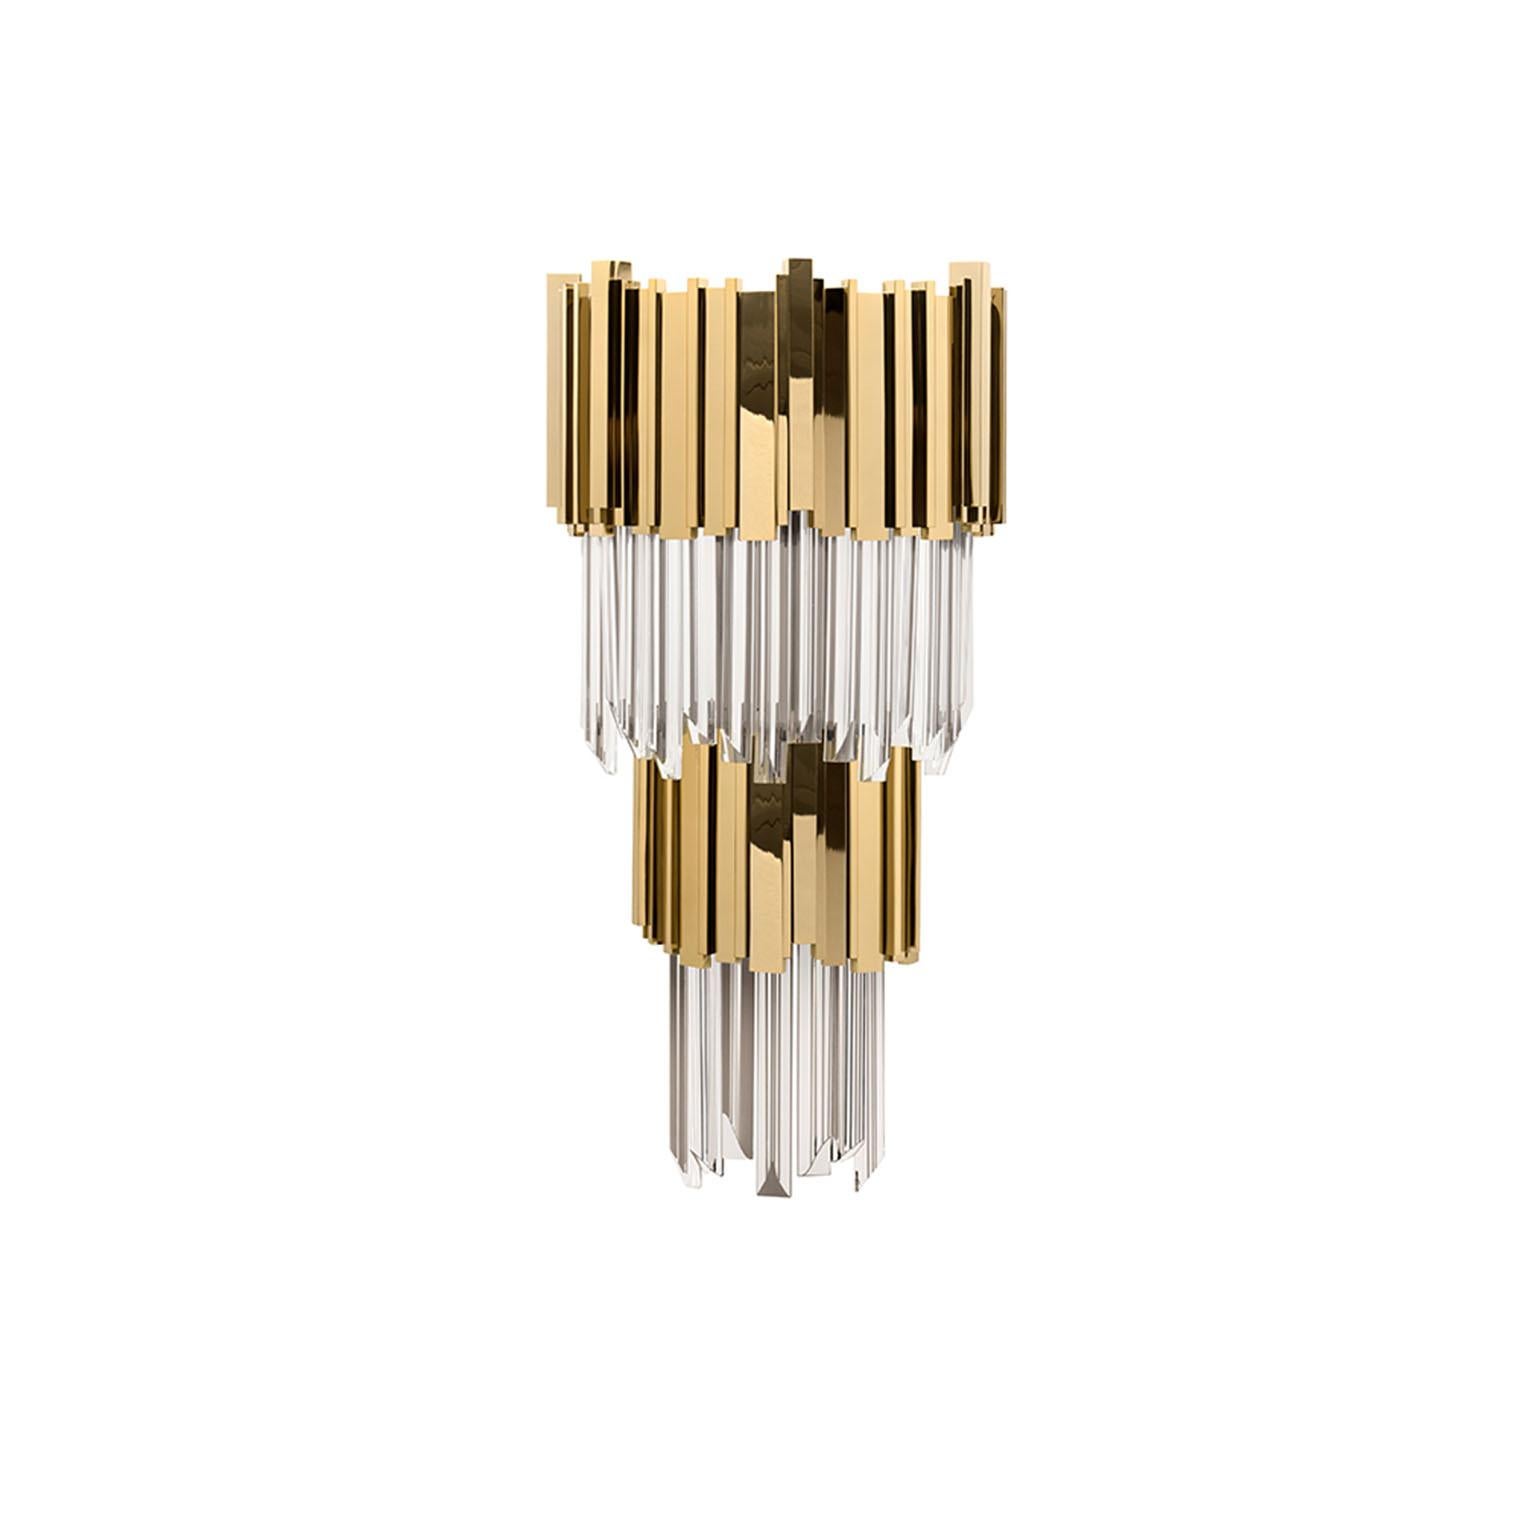 The Empire wall gets its inspiration on The Empire State Building and that’s why this creation is so powerful and capable to transform every space in a stunning scenario.

MATERIALS
Body: Brass & Crystal Glass

STANDARD FINISHES
Body: Gold